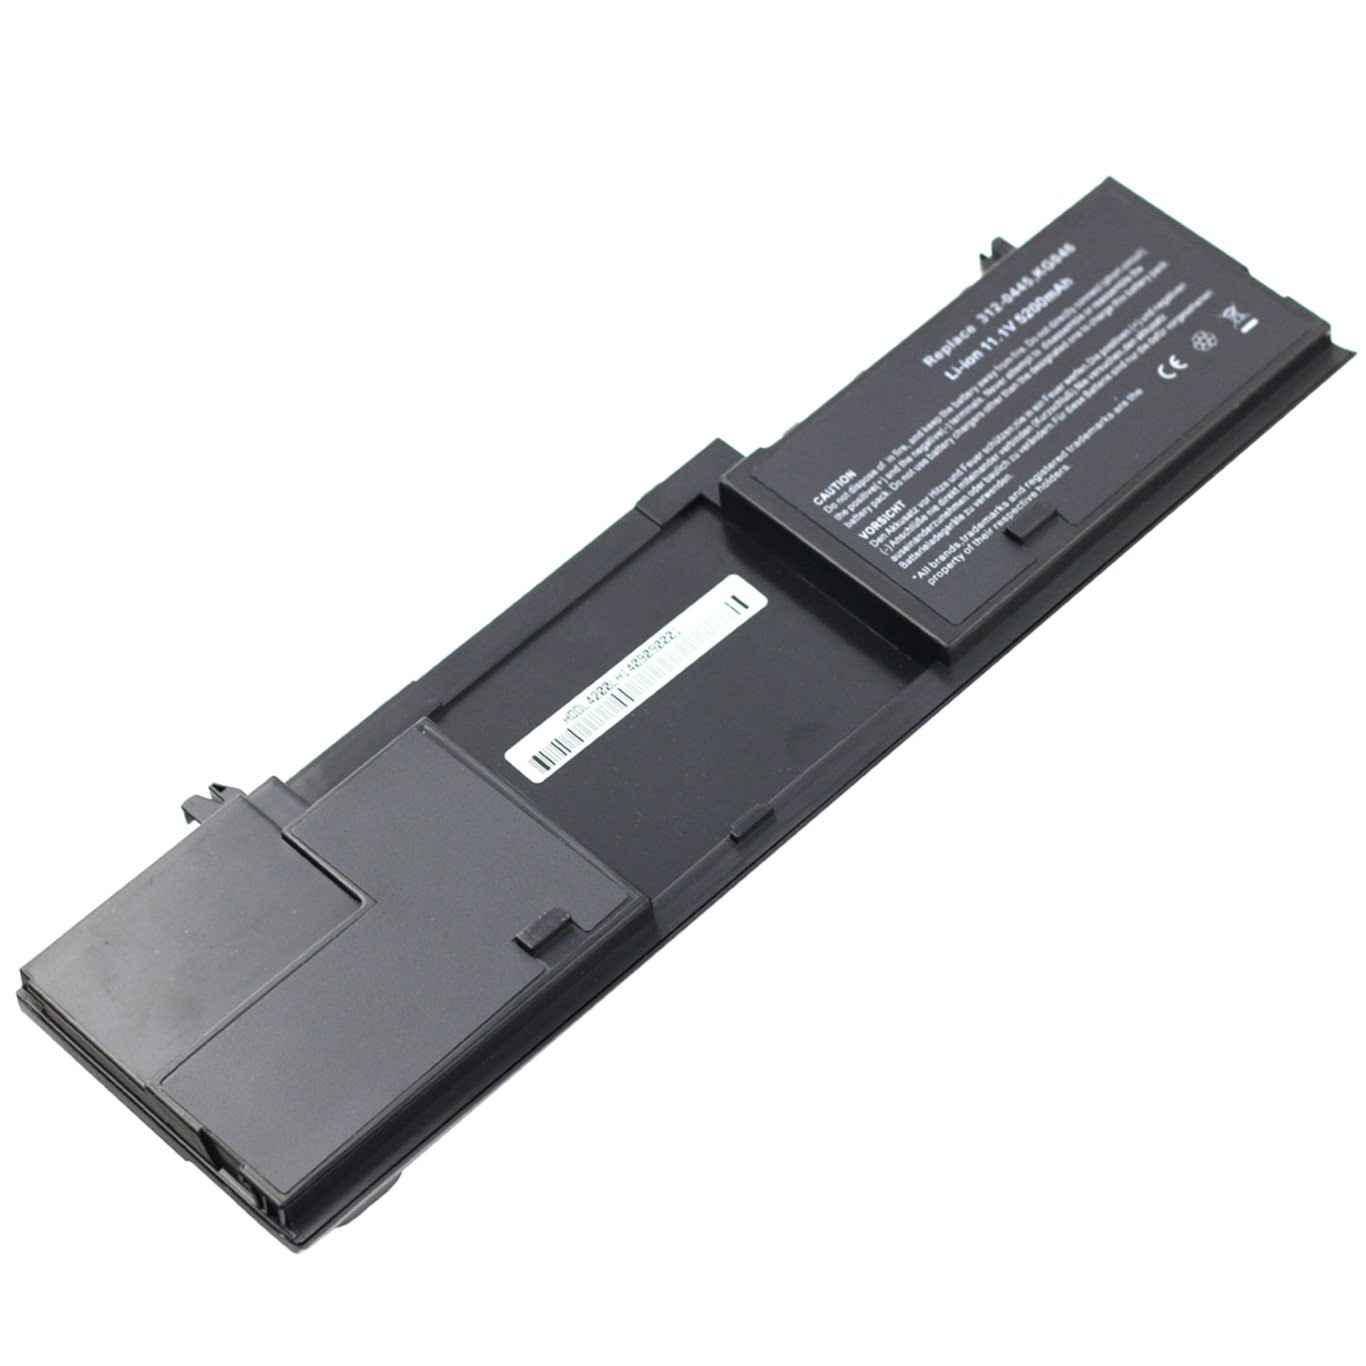 Dell 0fg447, 0fg451 Laptop Battery For Latitude D420, Latitude D430 replacement